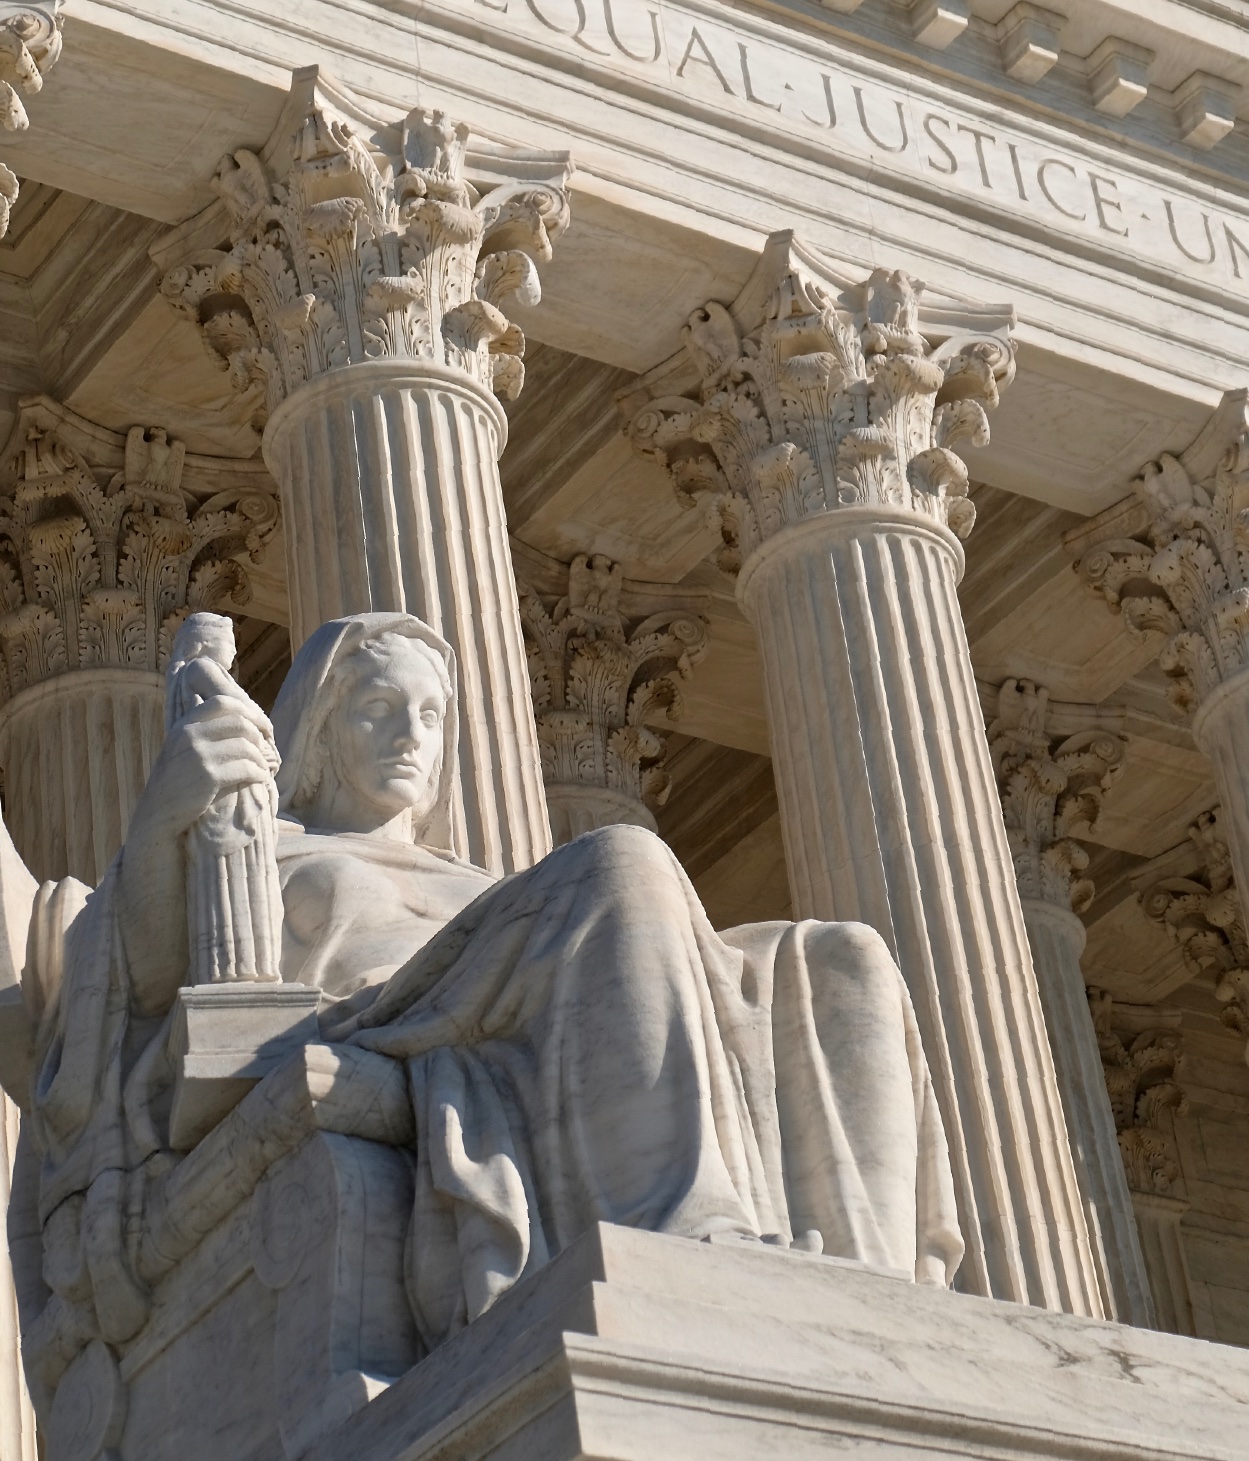 A statue of Justice in front of the US Supreme Court